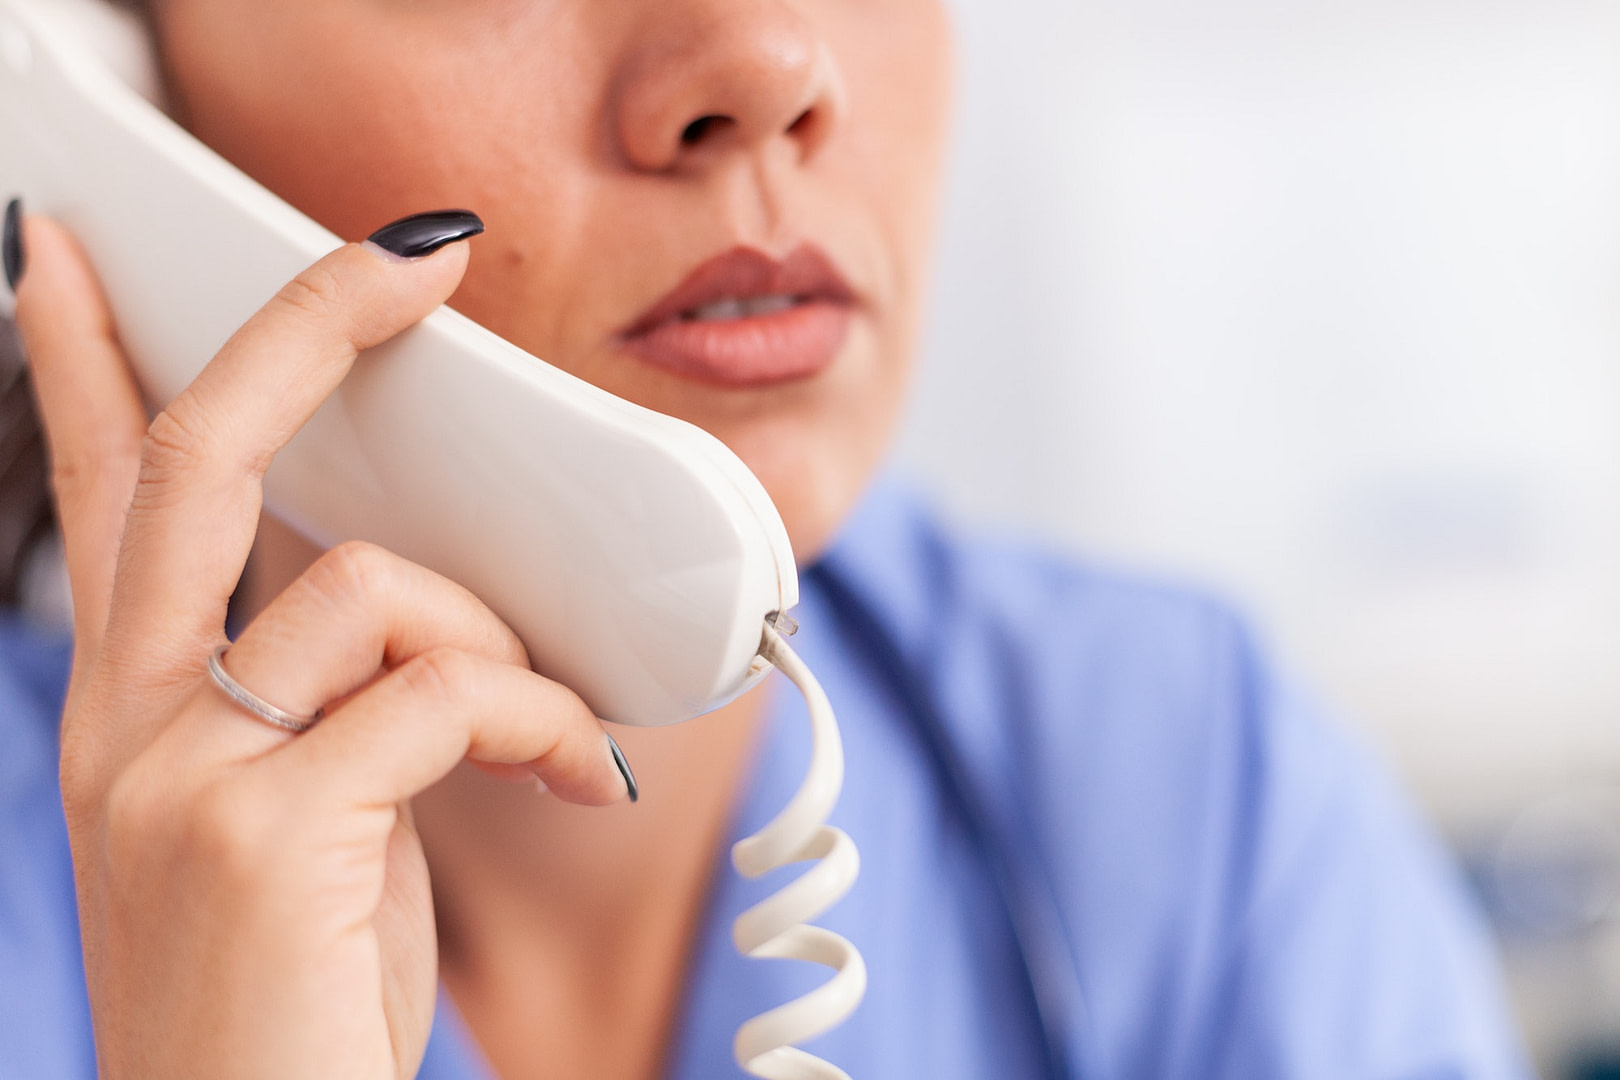 Medical receptionist answering phone calls